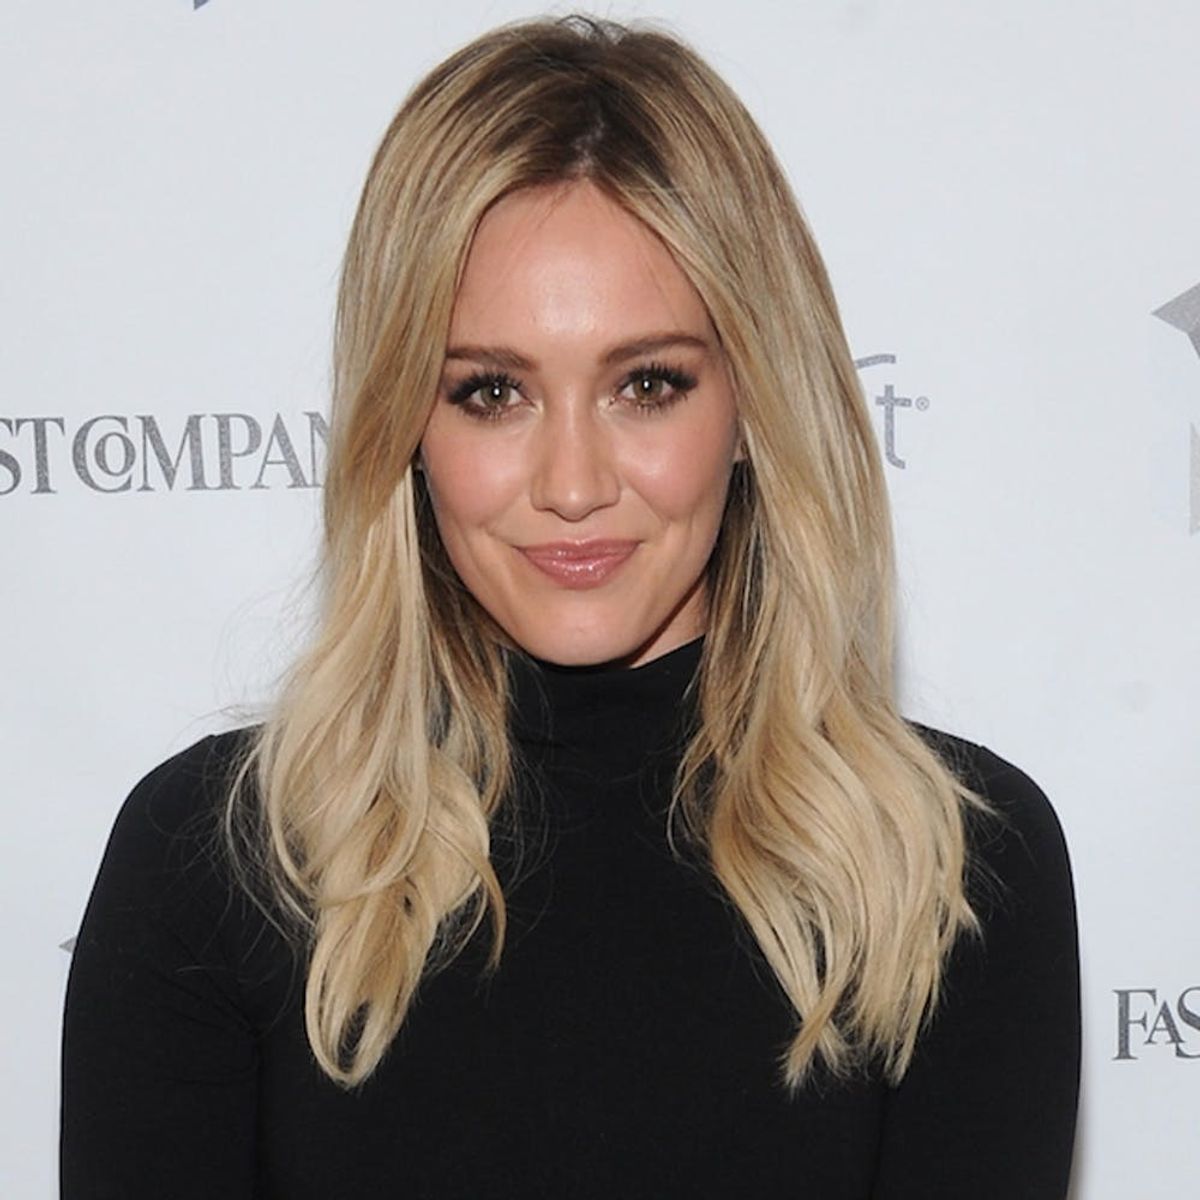 Hilary Duff’s Dramatic New Haircut Proves That Shorter Is Better